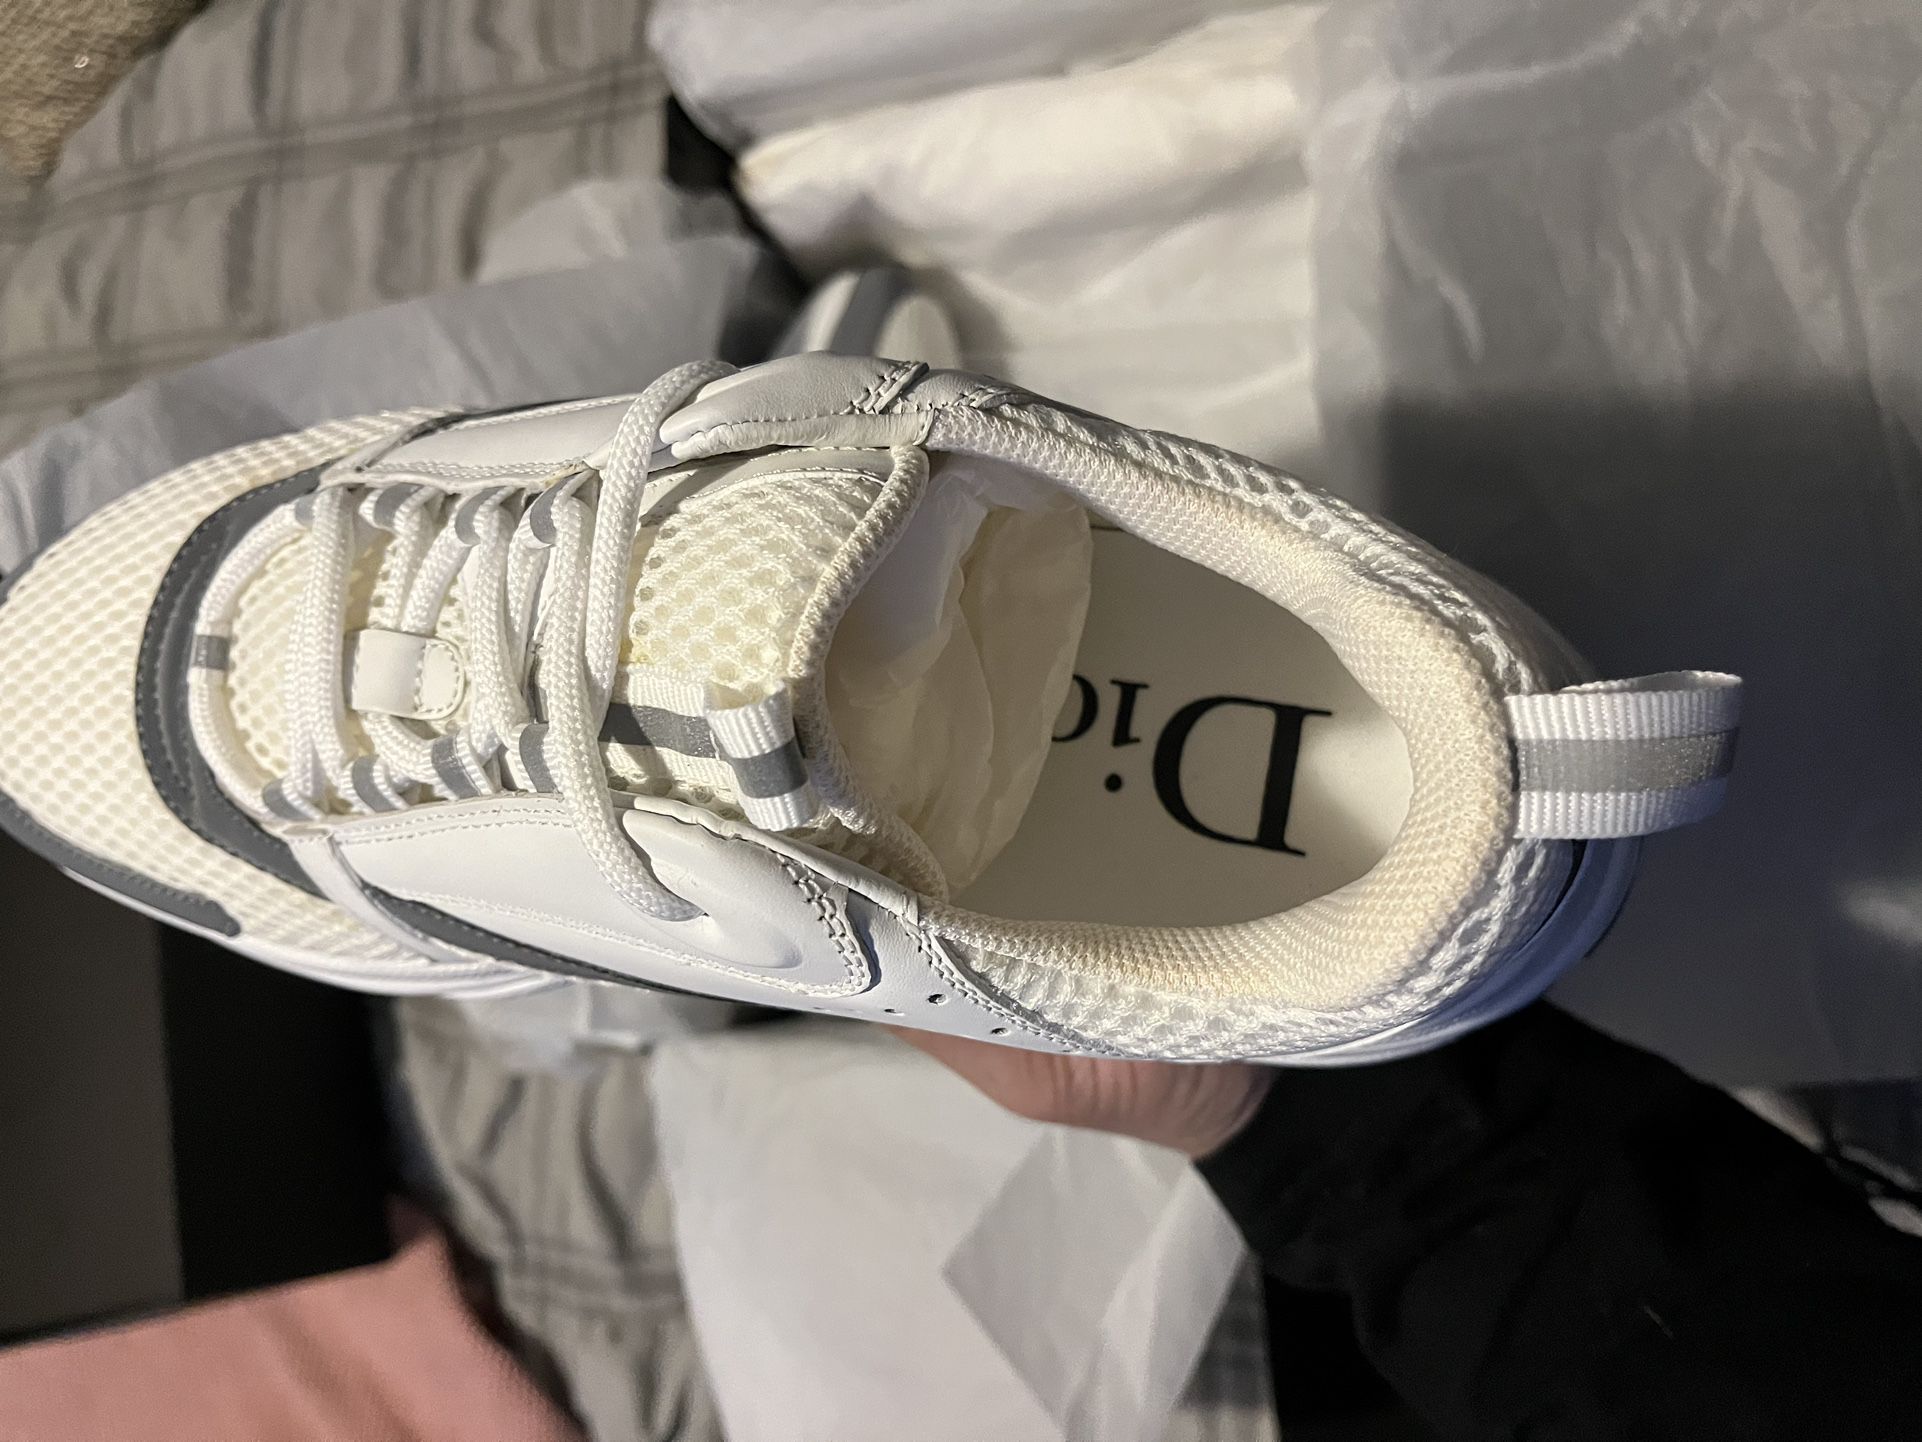 Christian Dior Sneakers B22 Size 8 for Sale in Brooklyn, NY - OfferUp